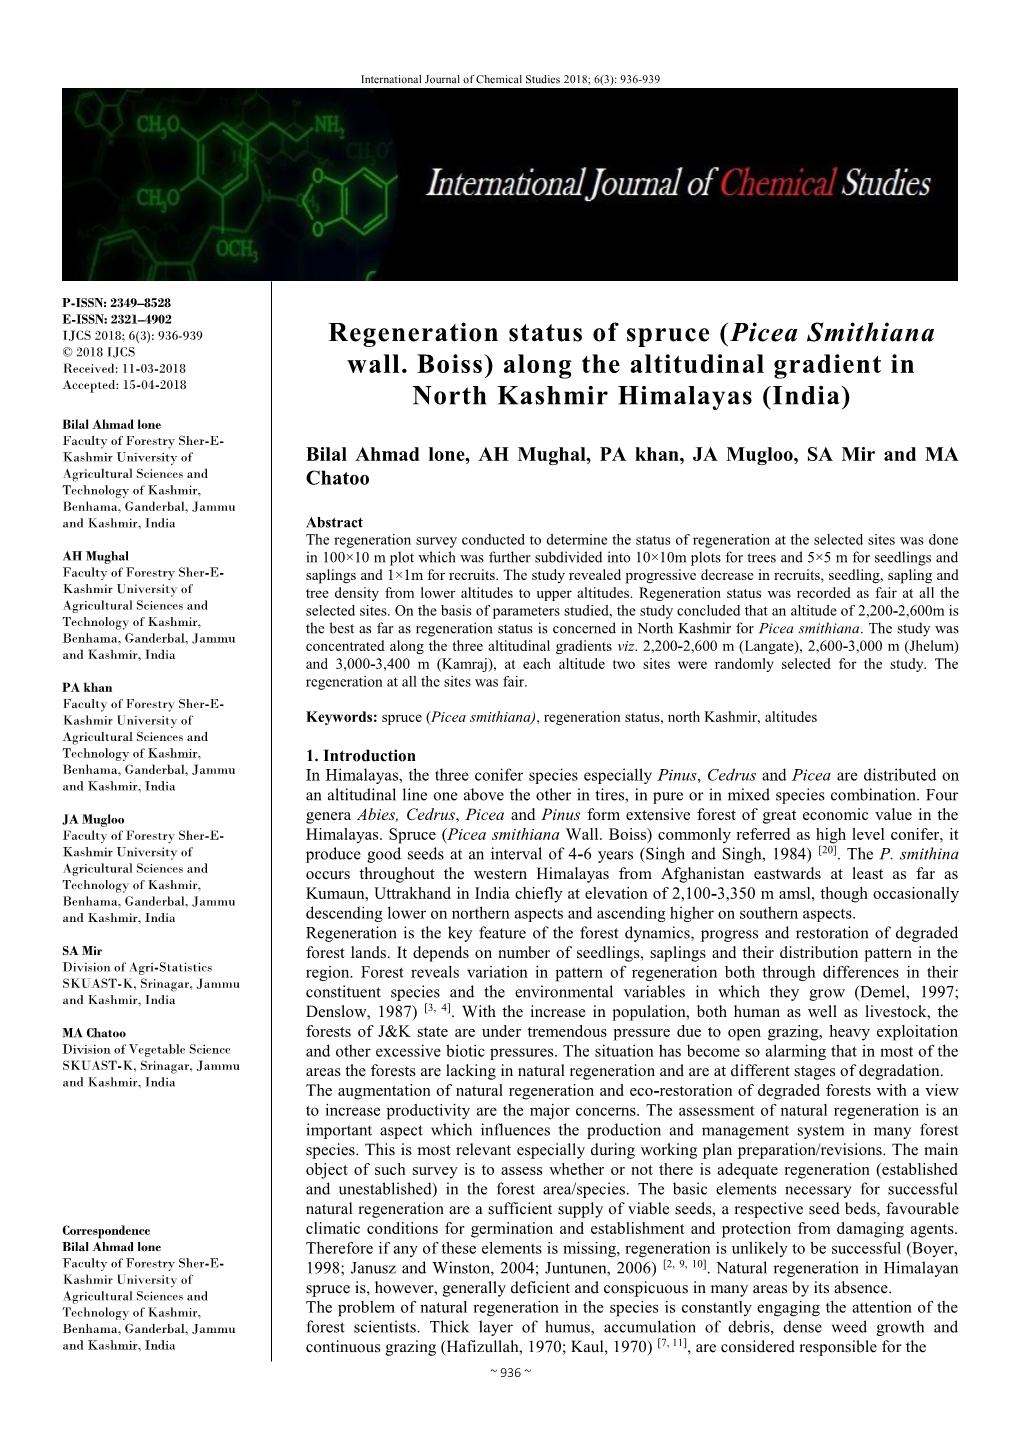 Regeneration Status of Spruce (Picea Smithiana Wall. Boiss) Along the Altitudinal Gradient in North Kashmir Himalayas